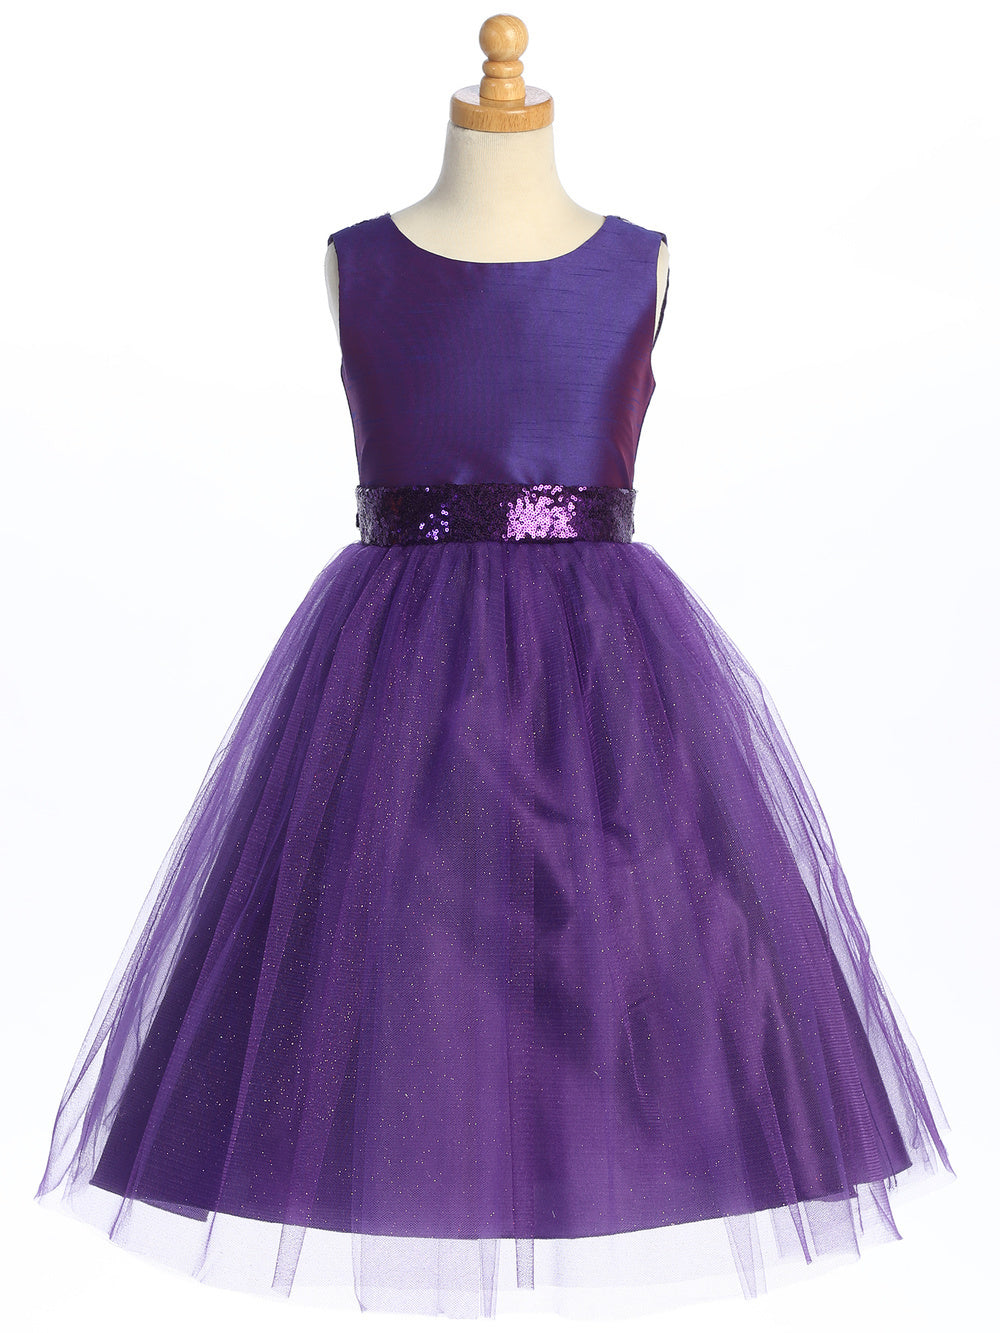 Purple shantung dress with sparkle tulle and sequins, a royal charm for a flower girl.